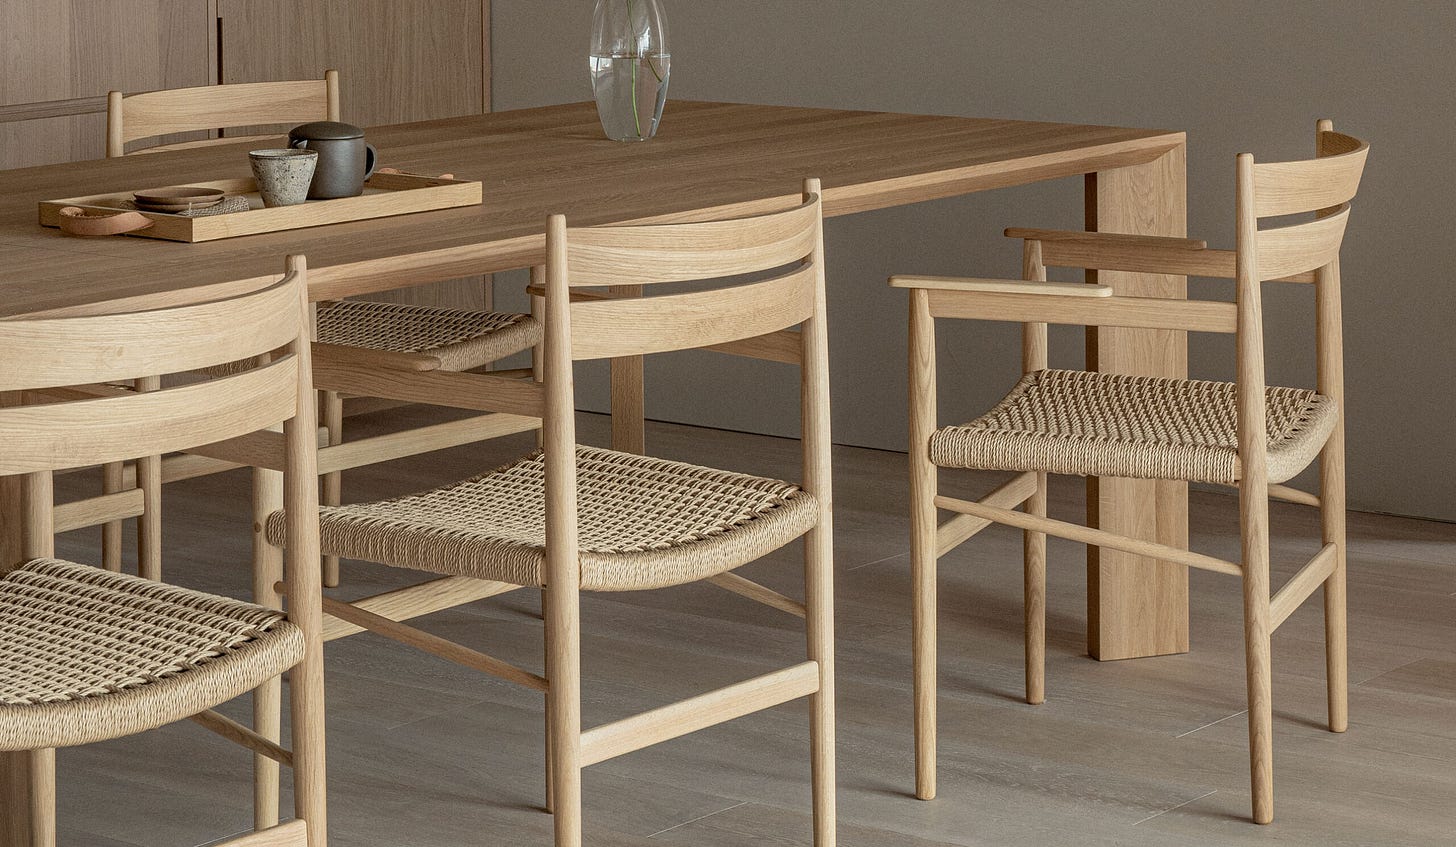 N-DC04 Dining Chair for Karimoku Case Study